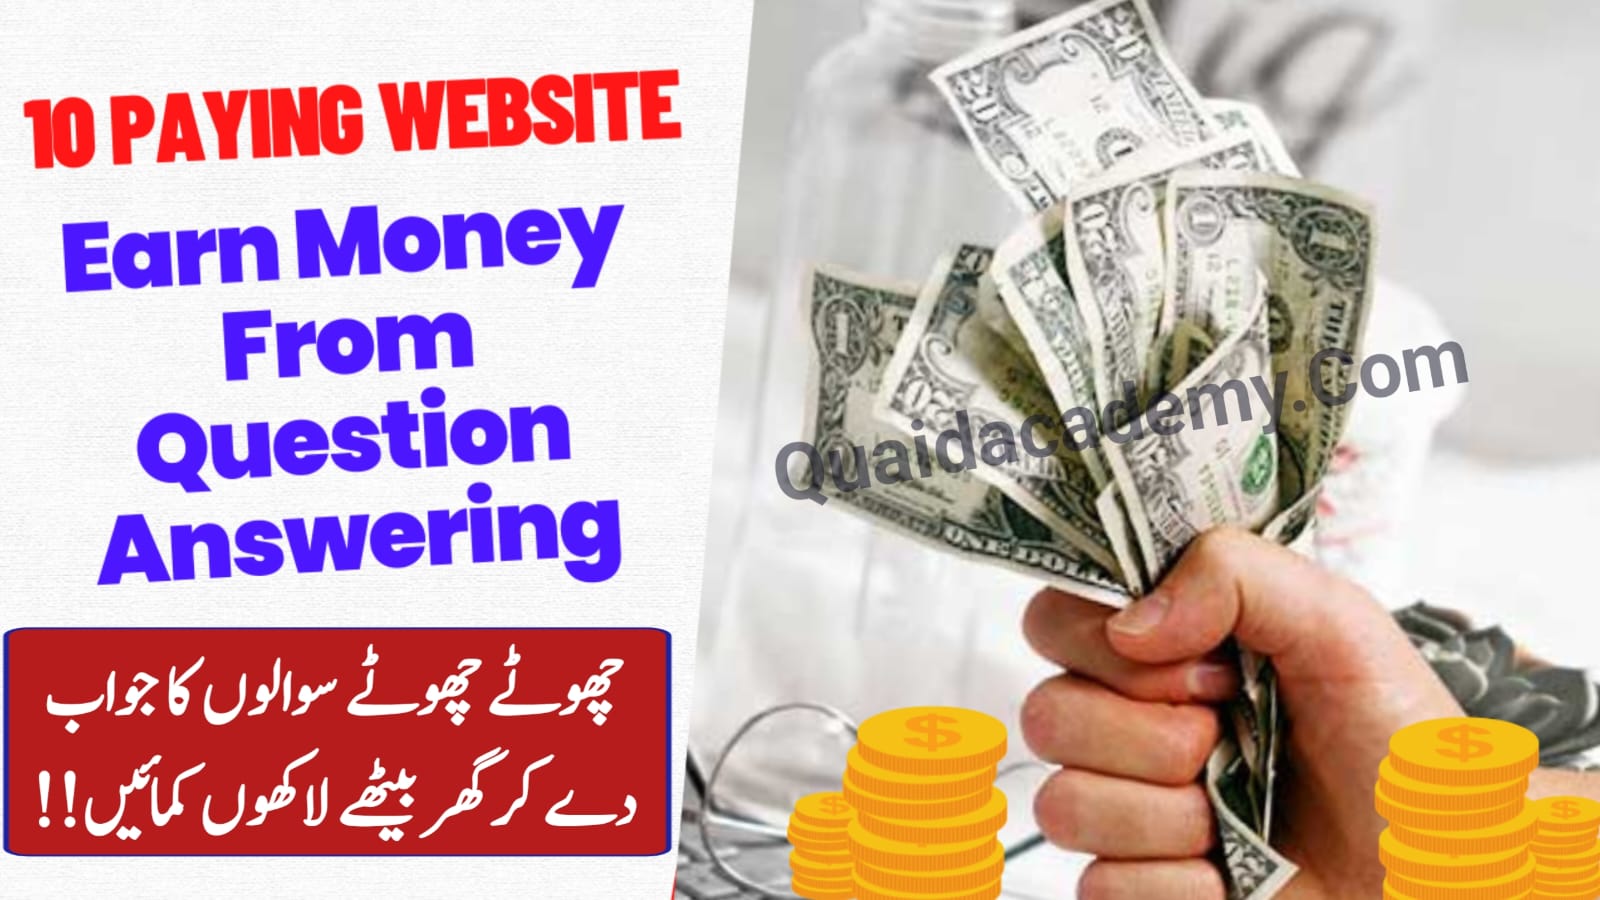 How to Earn for Question Answering - 10 Paying Websites